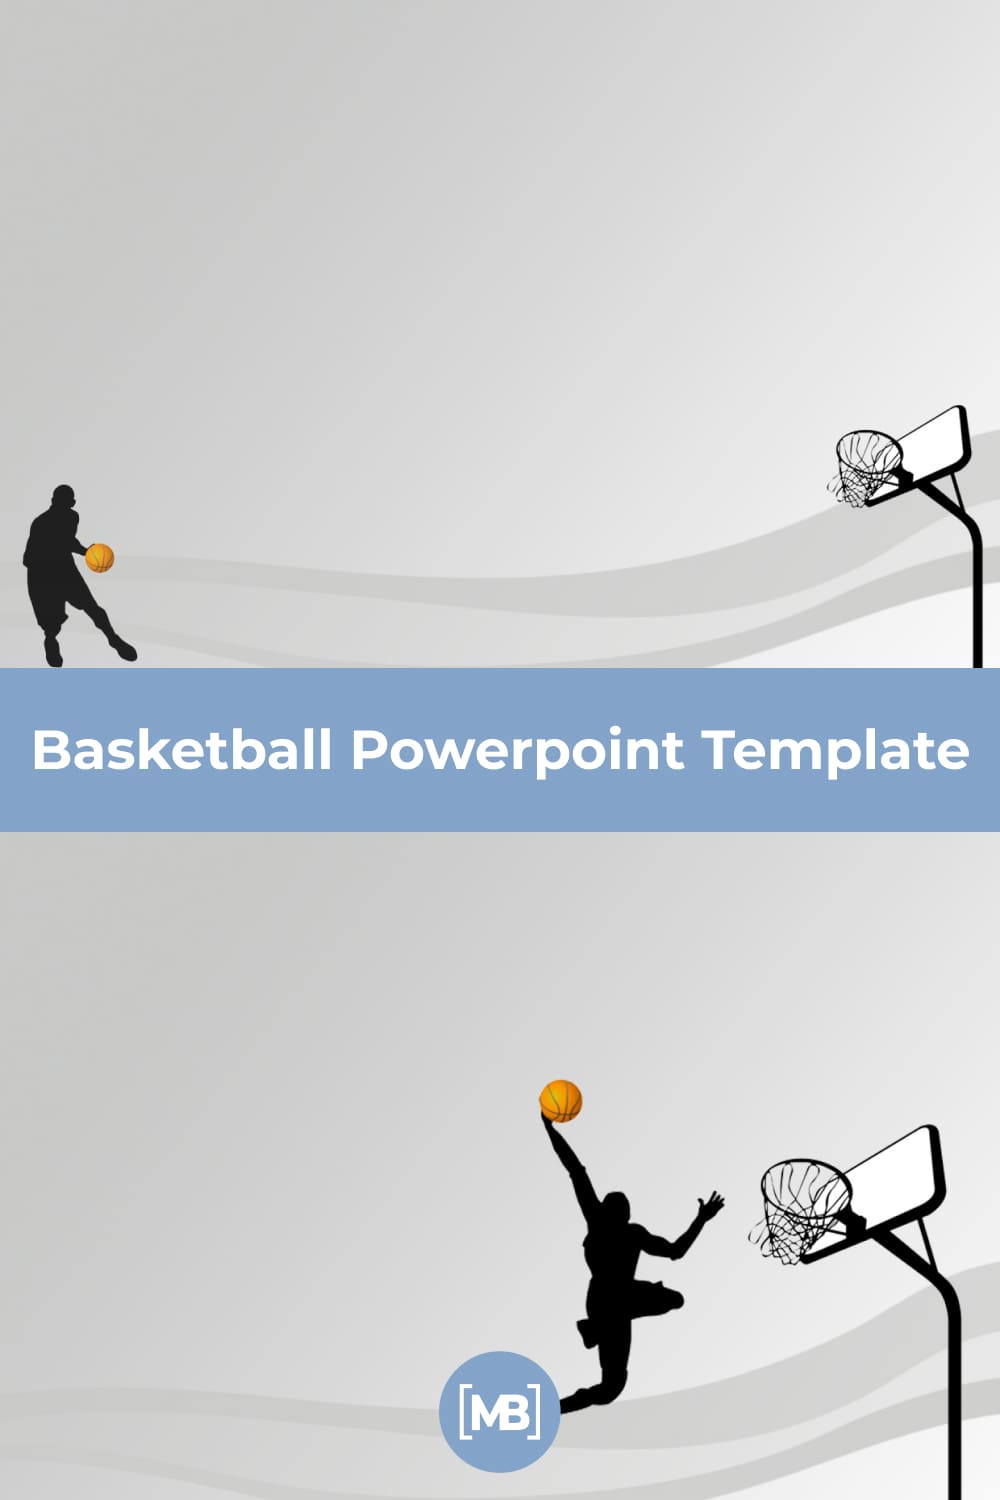 Definitely the best Basketball PowerPoint template for PPT presentations that you can download for free and use in your sport presentations as well as basket championship or NBA simulation.